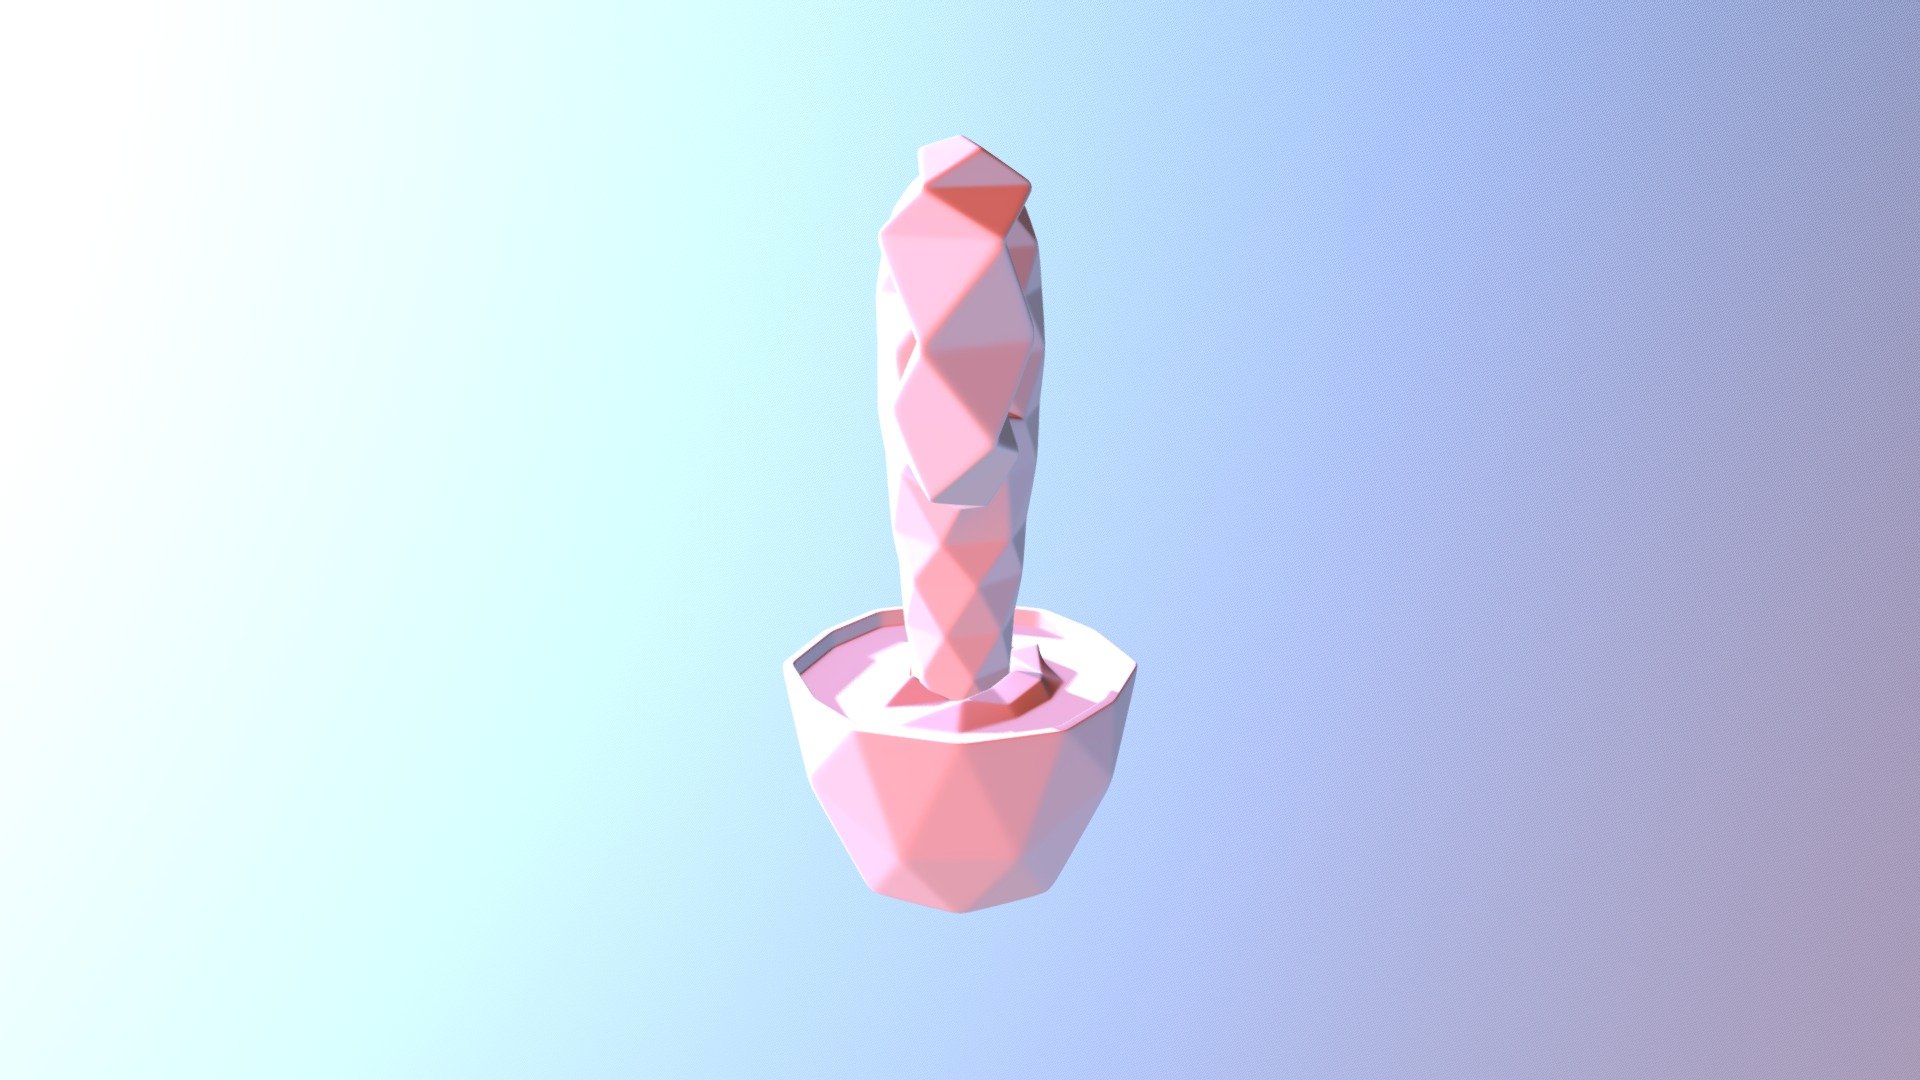 Lowpoly Cactus Vectary (1)